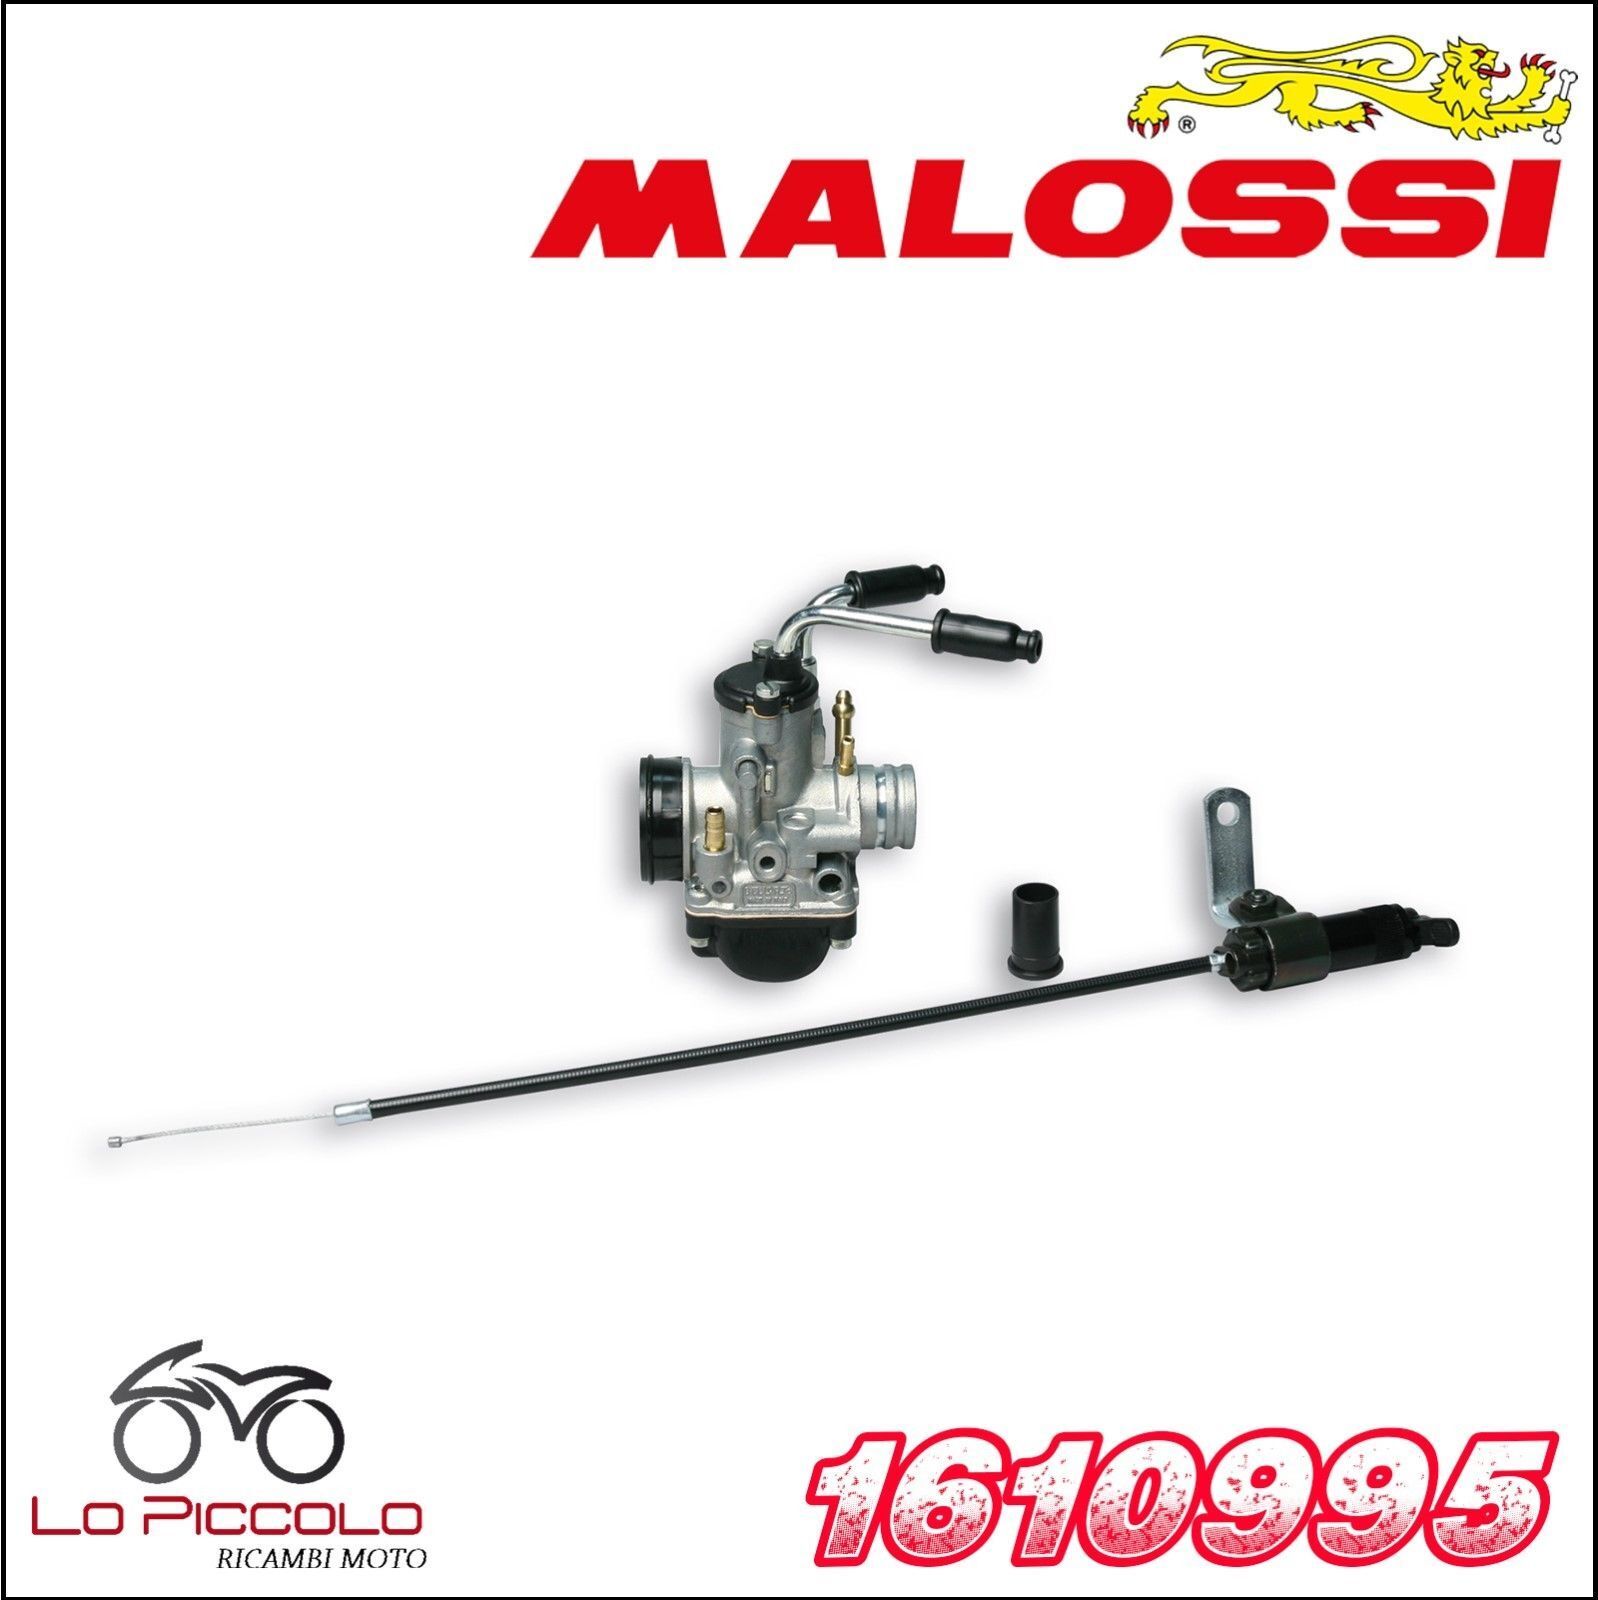 1610995 Carburettor Complete 2021 new MALOSSI Phbg 21 Yesterd Year-end gift Malaguti BS